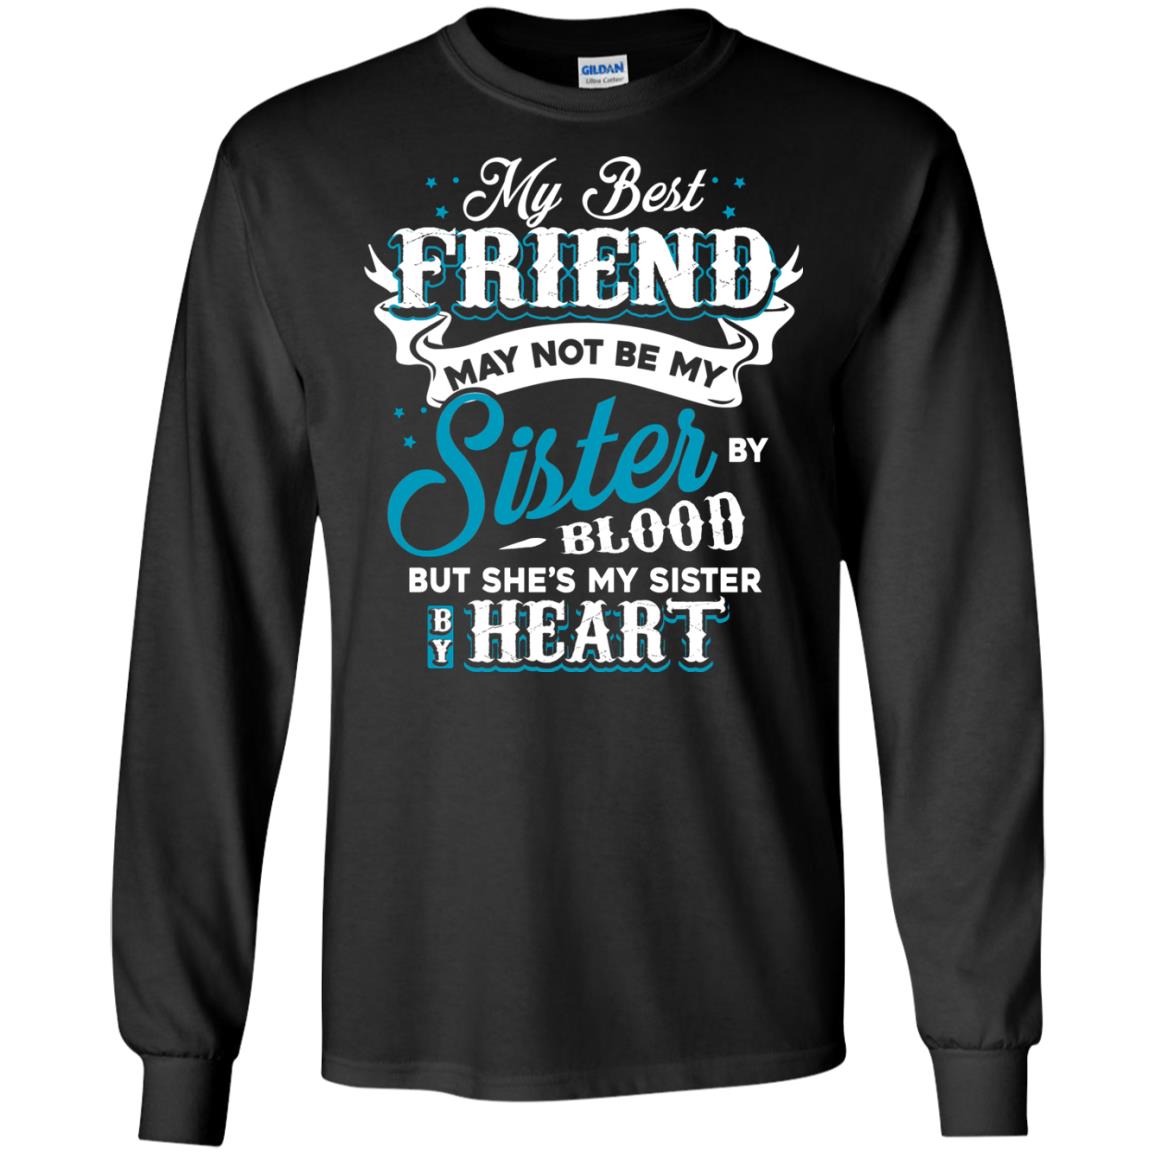 My Best Friend May Not Be My Sister By Blodd But She's My Sister By HeartG240 Gildan LS Ultra Cotton T-Shirt